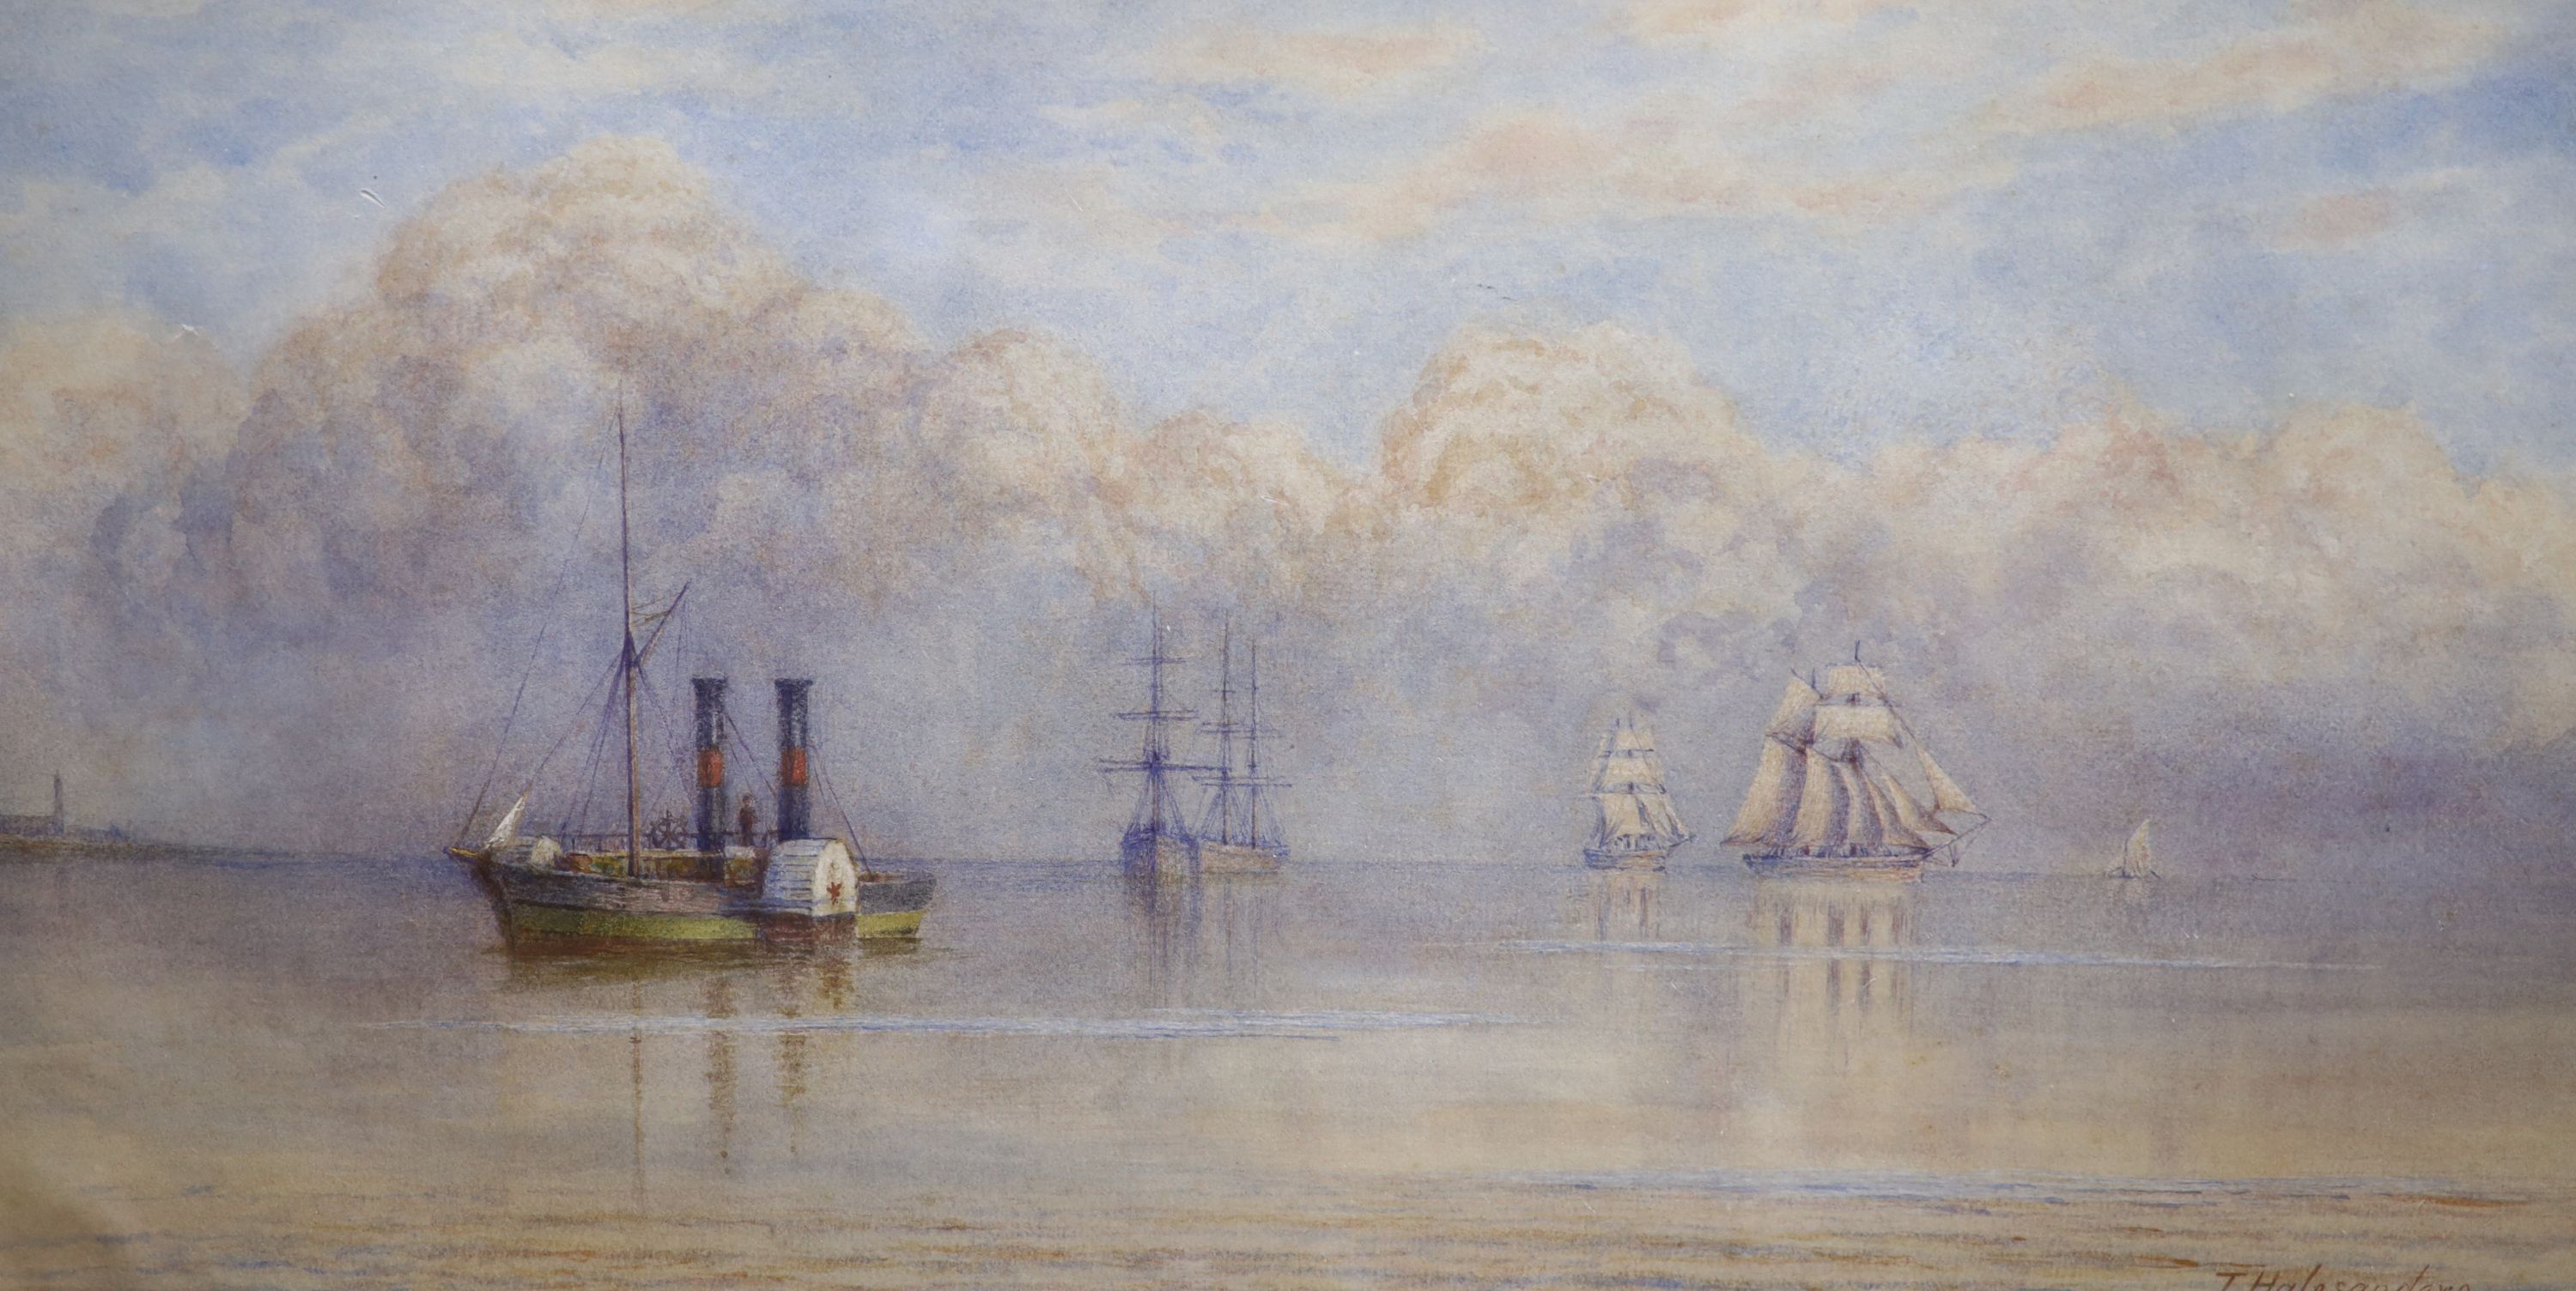 Thomas Hale Sanders (fl.1880-1906), watercolour, Paddlesteamers along the coast, signed and dated 1881, 27 x 50cm